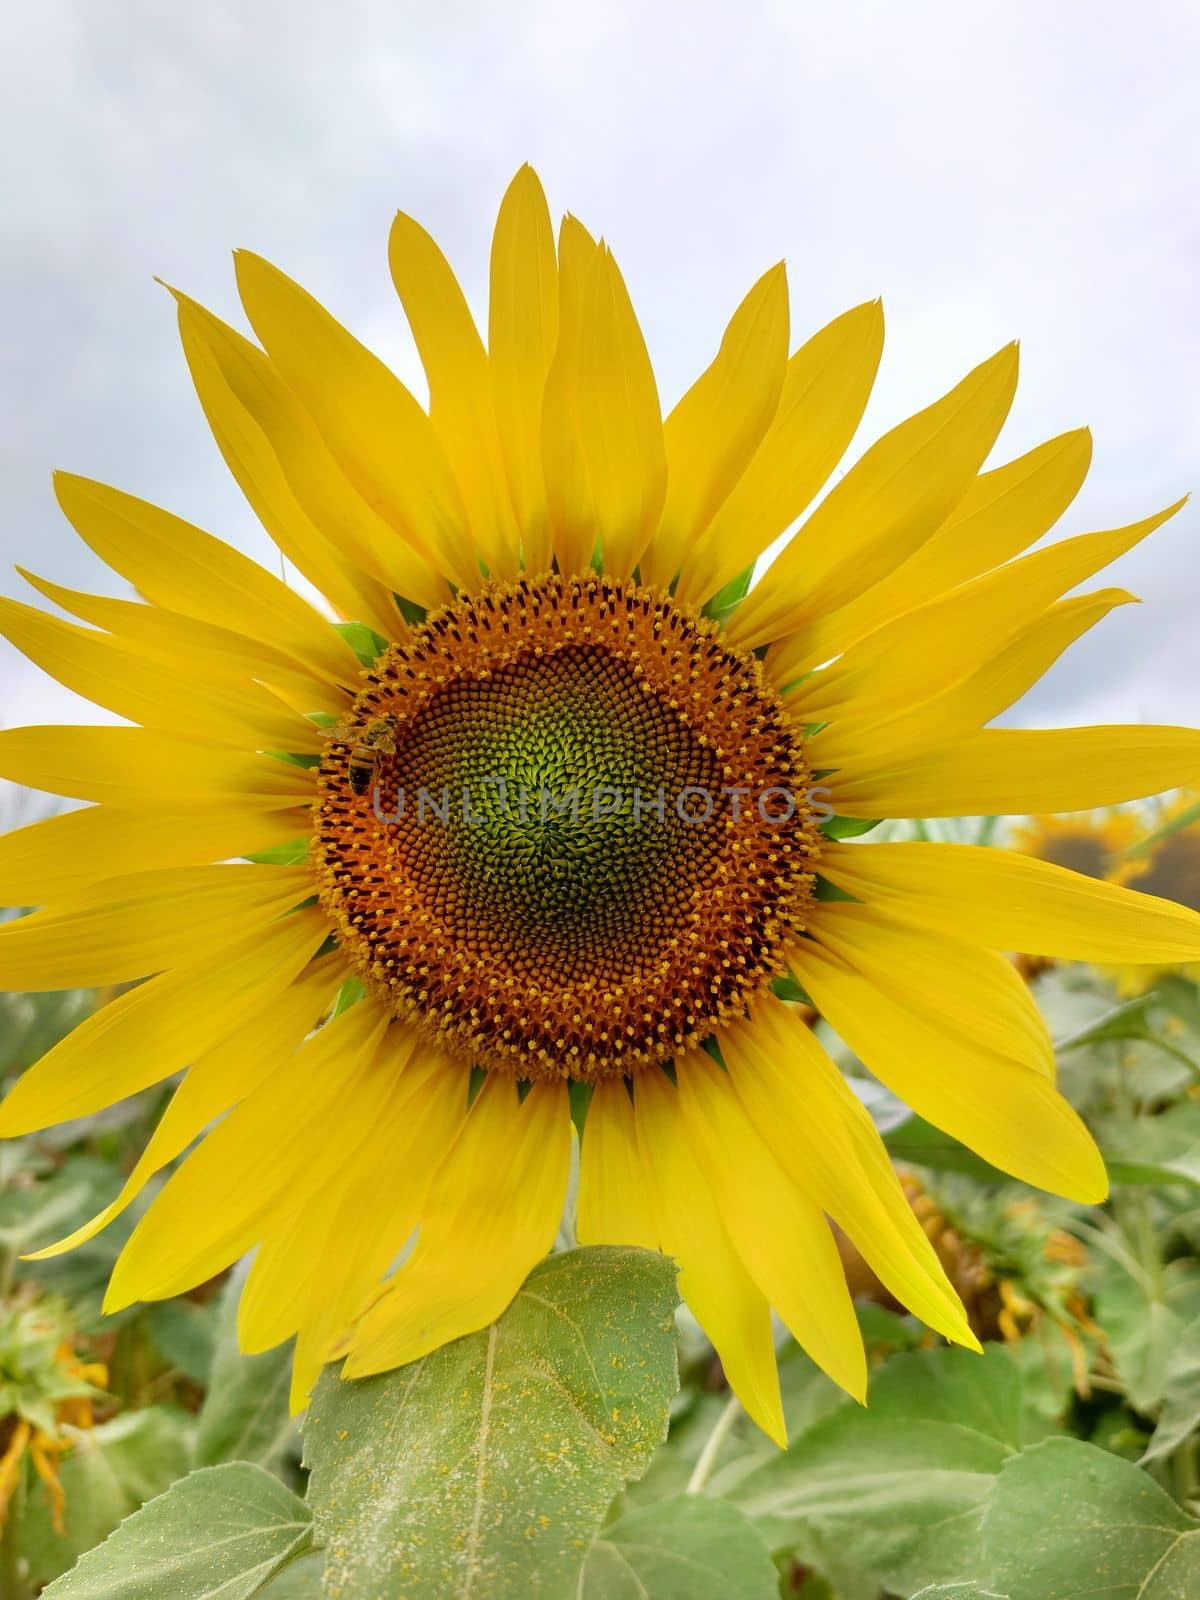 Yellow sunflower in full bloom on a cloudy day close-up.Texture or background